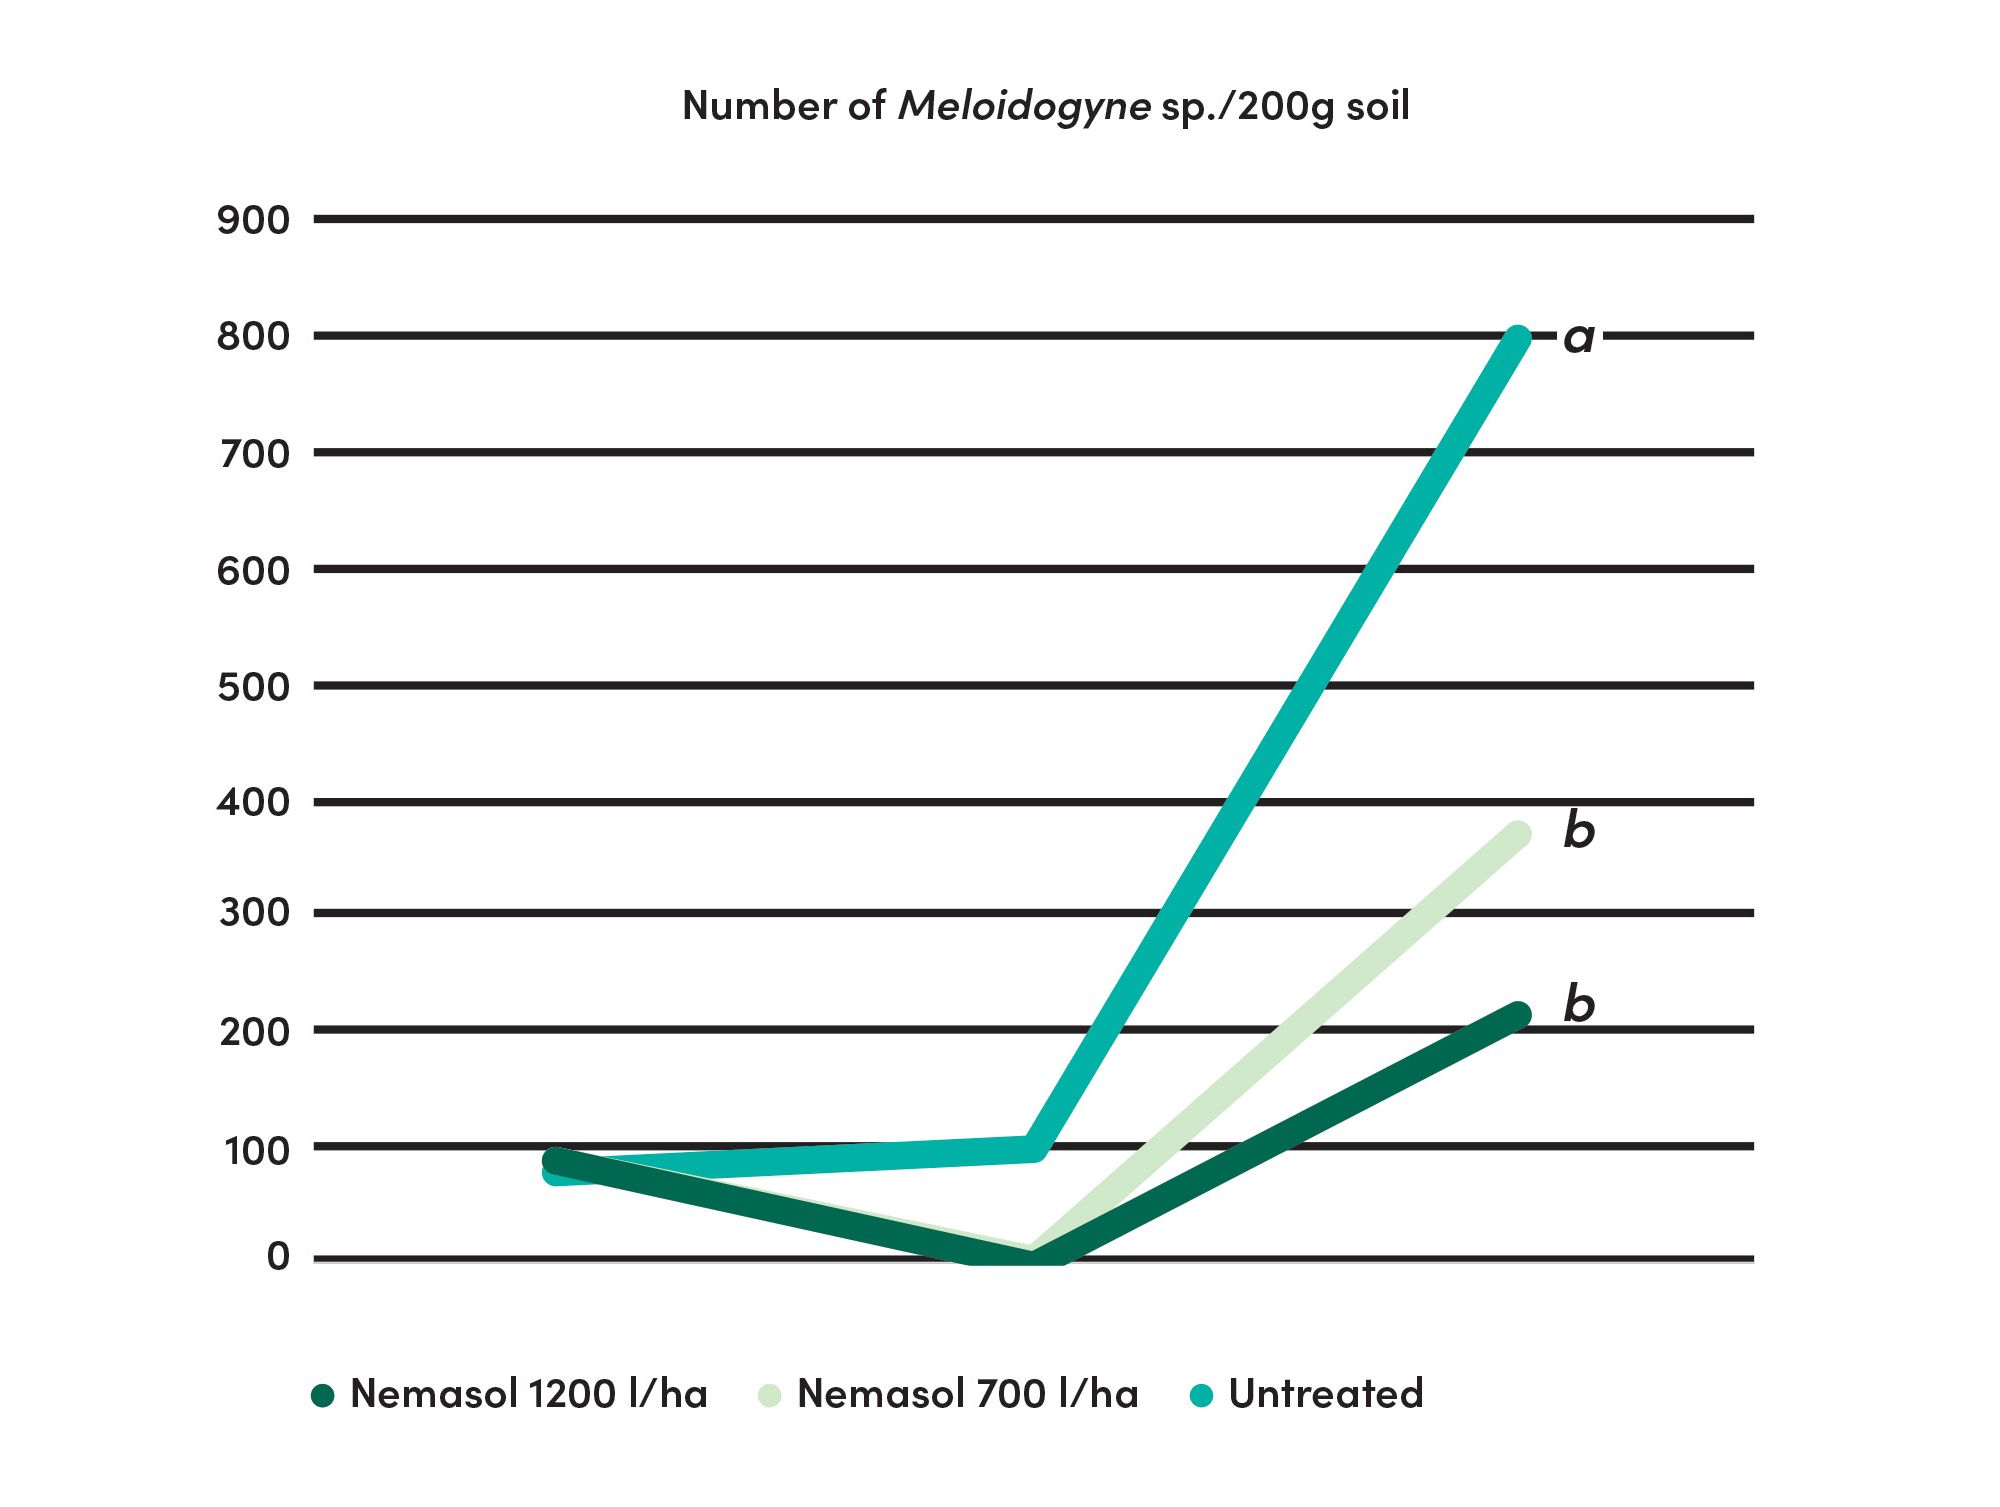 Graphic number of Meloidogynes 